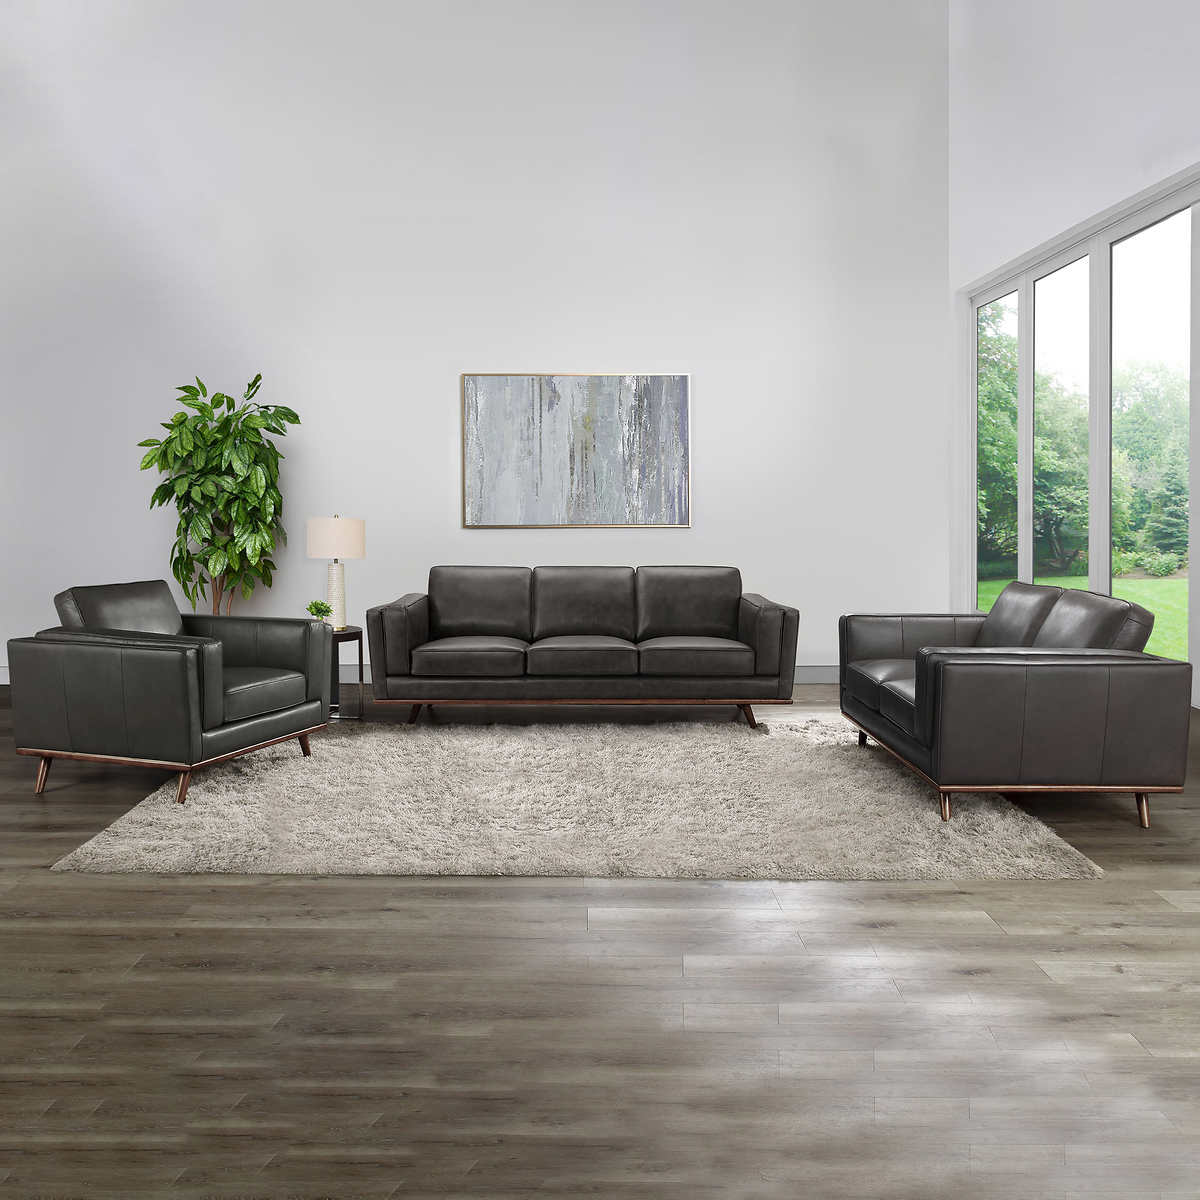 Positano 3 Piece Leather Set Costco, What Does Sofas Mean In Nutrition